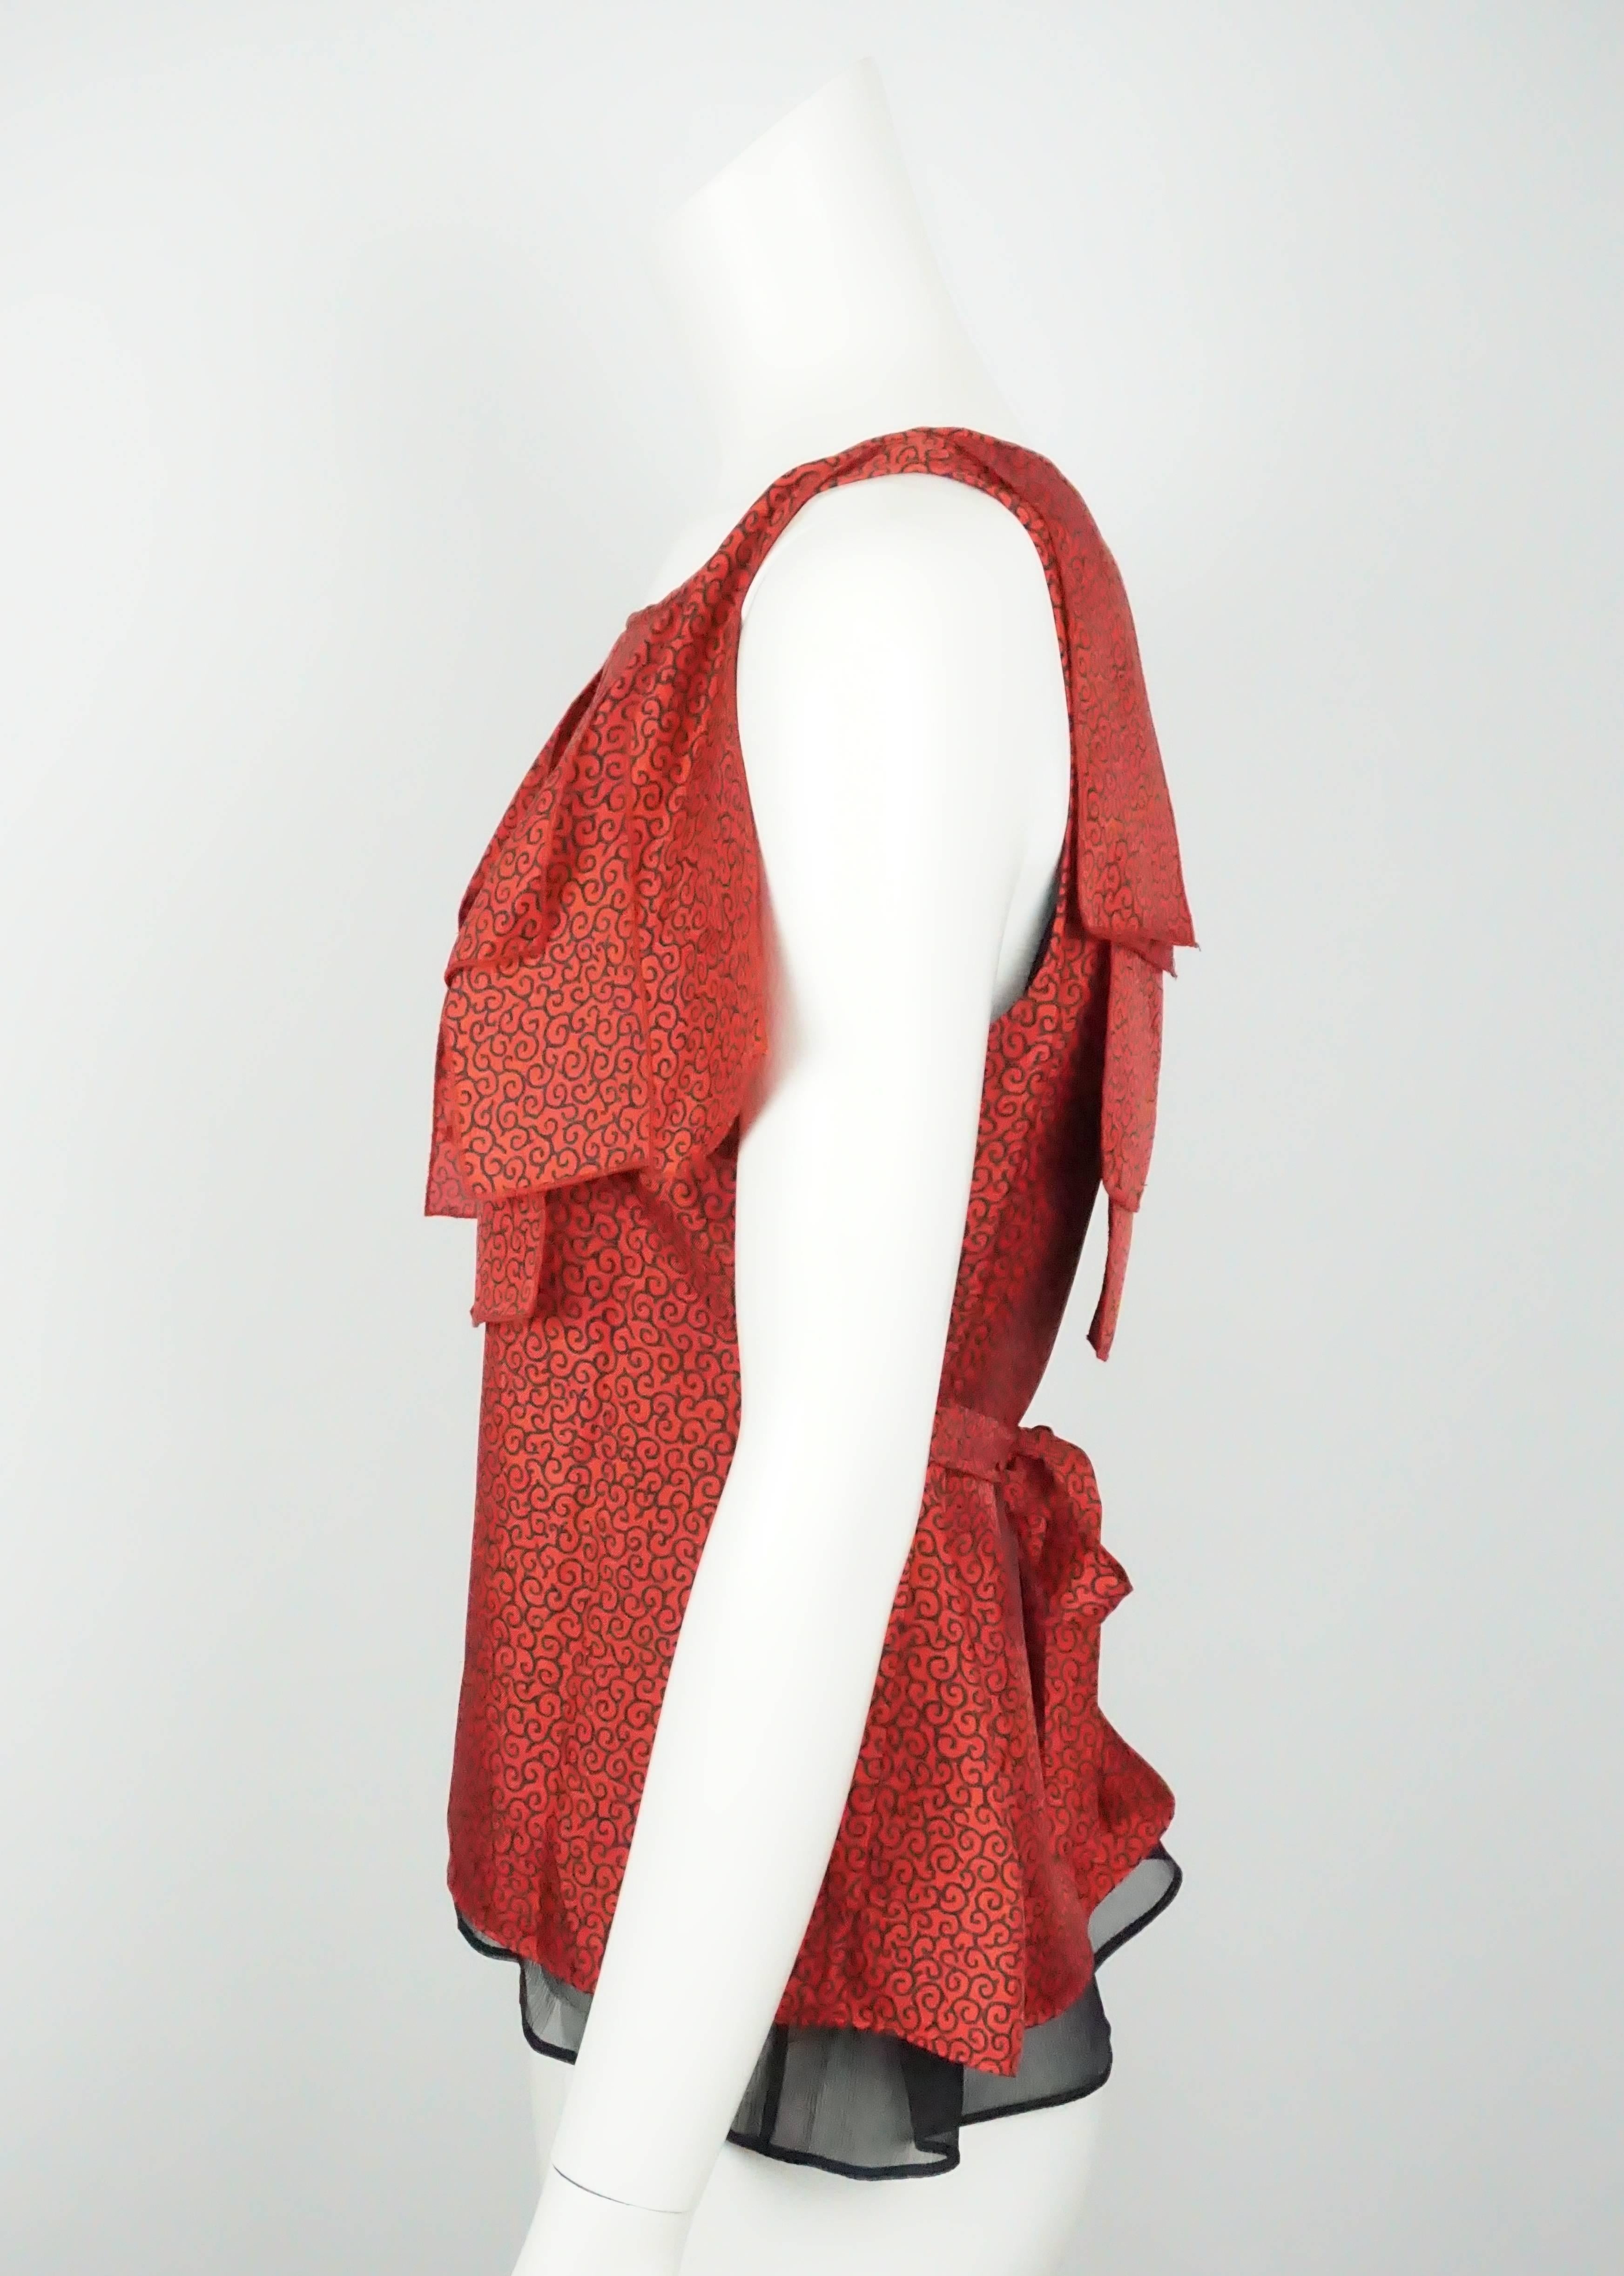 Etro Red and Black Filigree Silk Sleeveless - 44 - NWT This beautiful top is new with tags. The entire top is covered in a filigree design. The front and back of the top have a flaps hanging from the neckline. There are two straps hanging from the